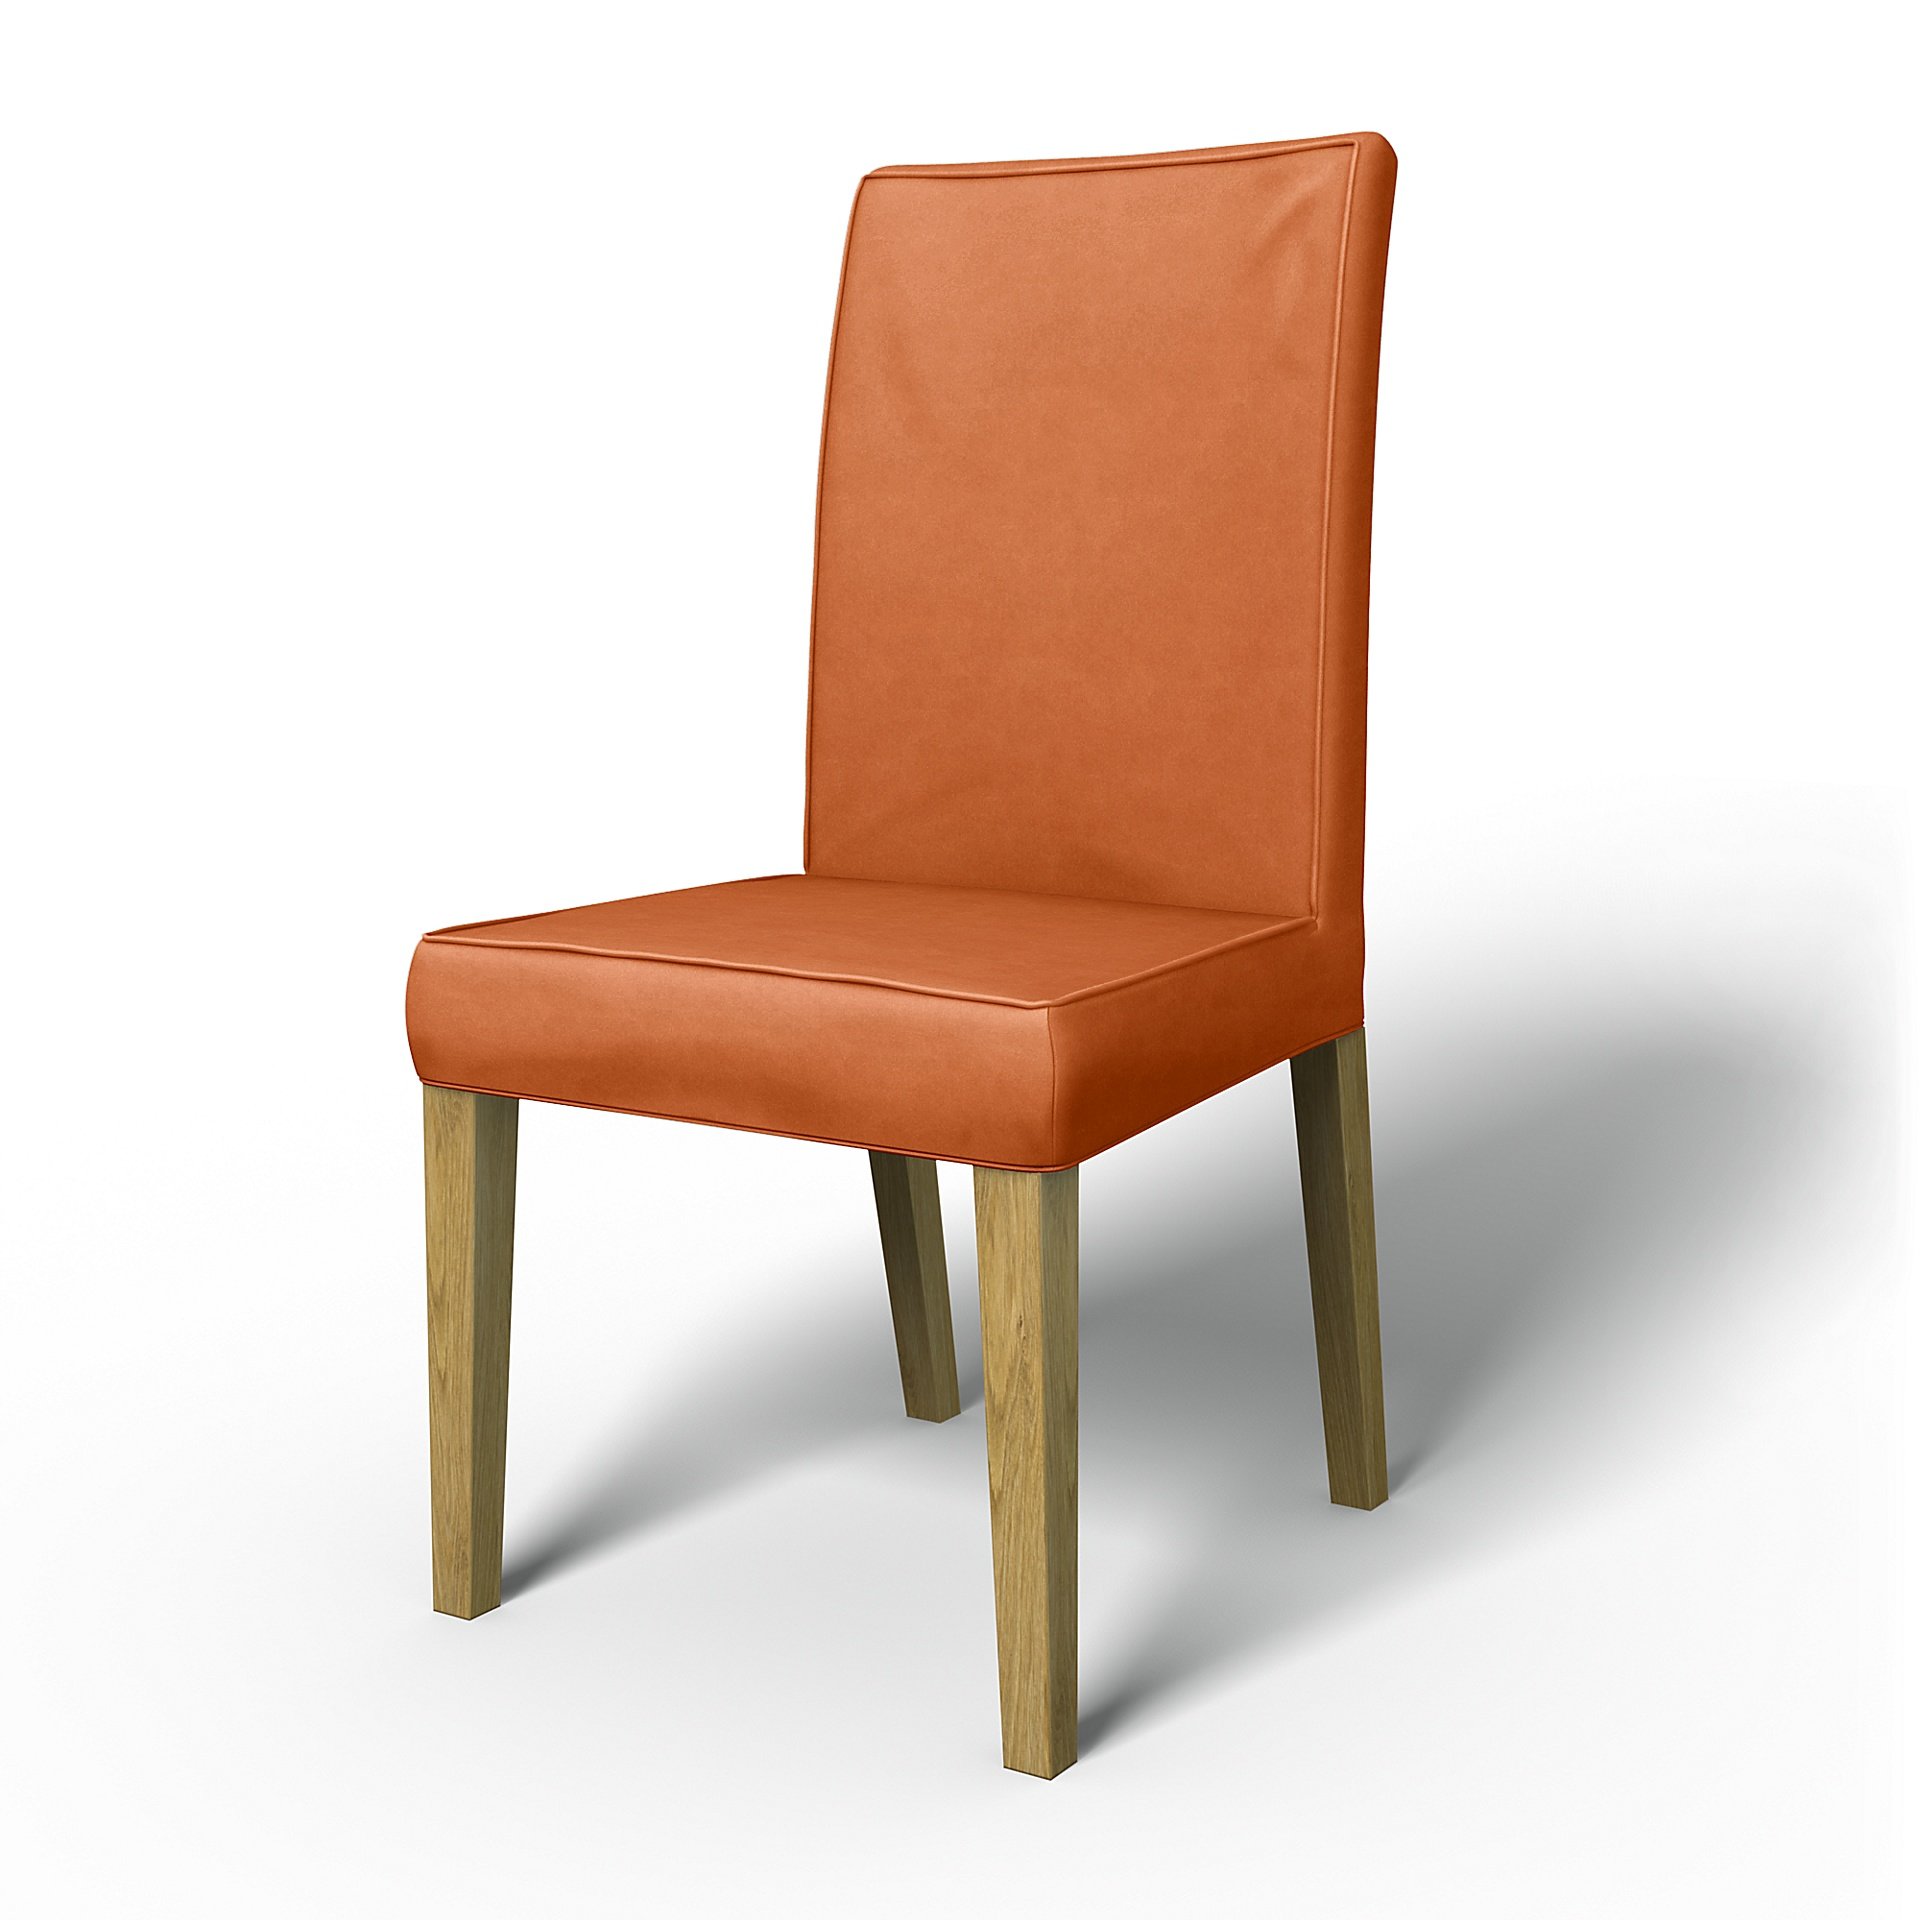 IKEA - Henriksdal Dining Chair Cover with piping (Standard model), Rust, Outdoor - Bemz